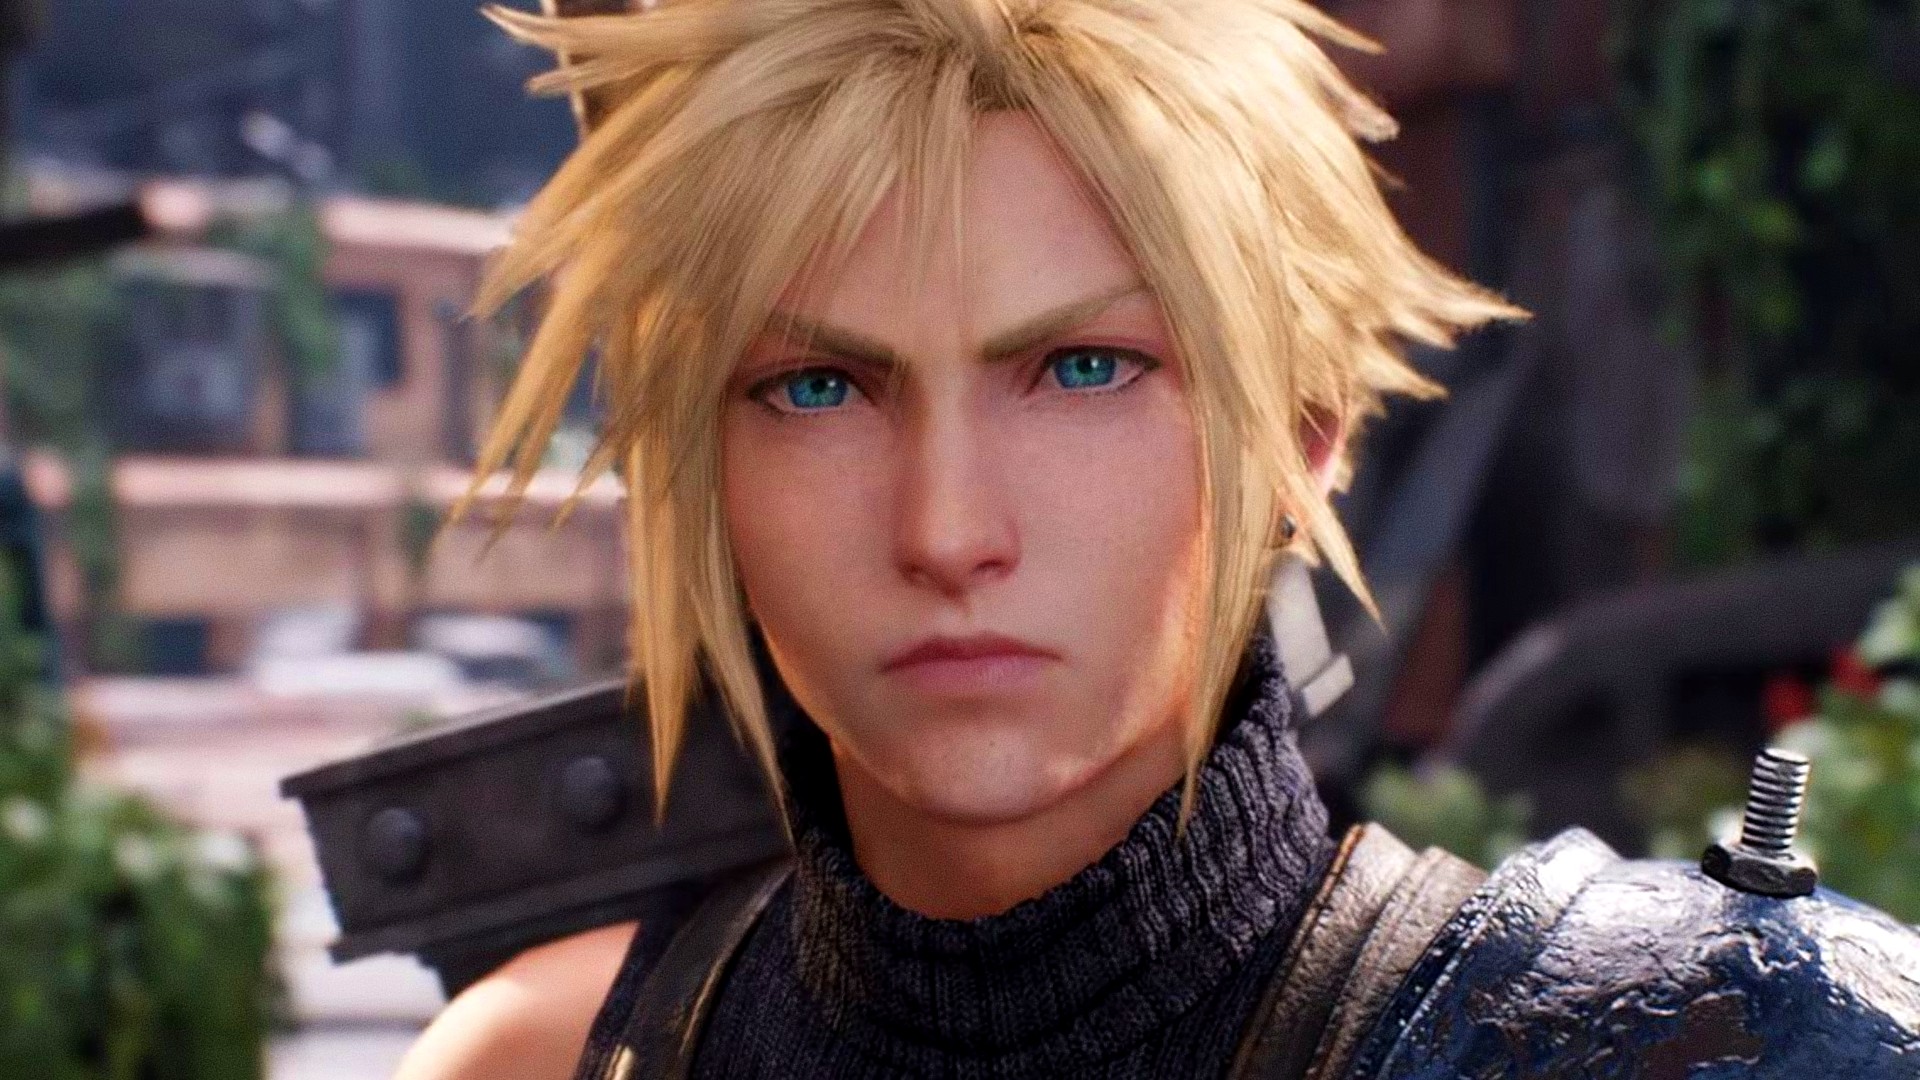 Final Fantasy: an image of Cloud Strife from the JRPG series